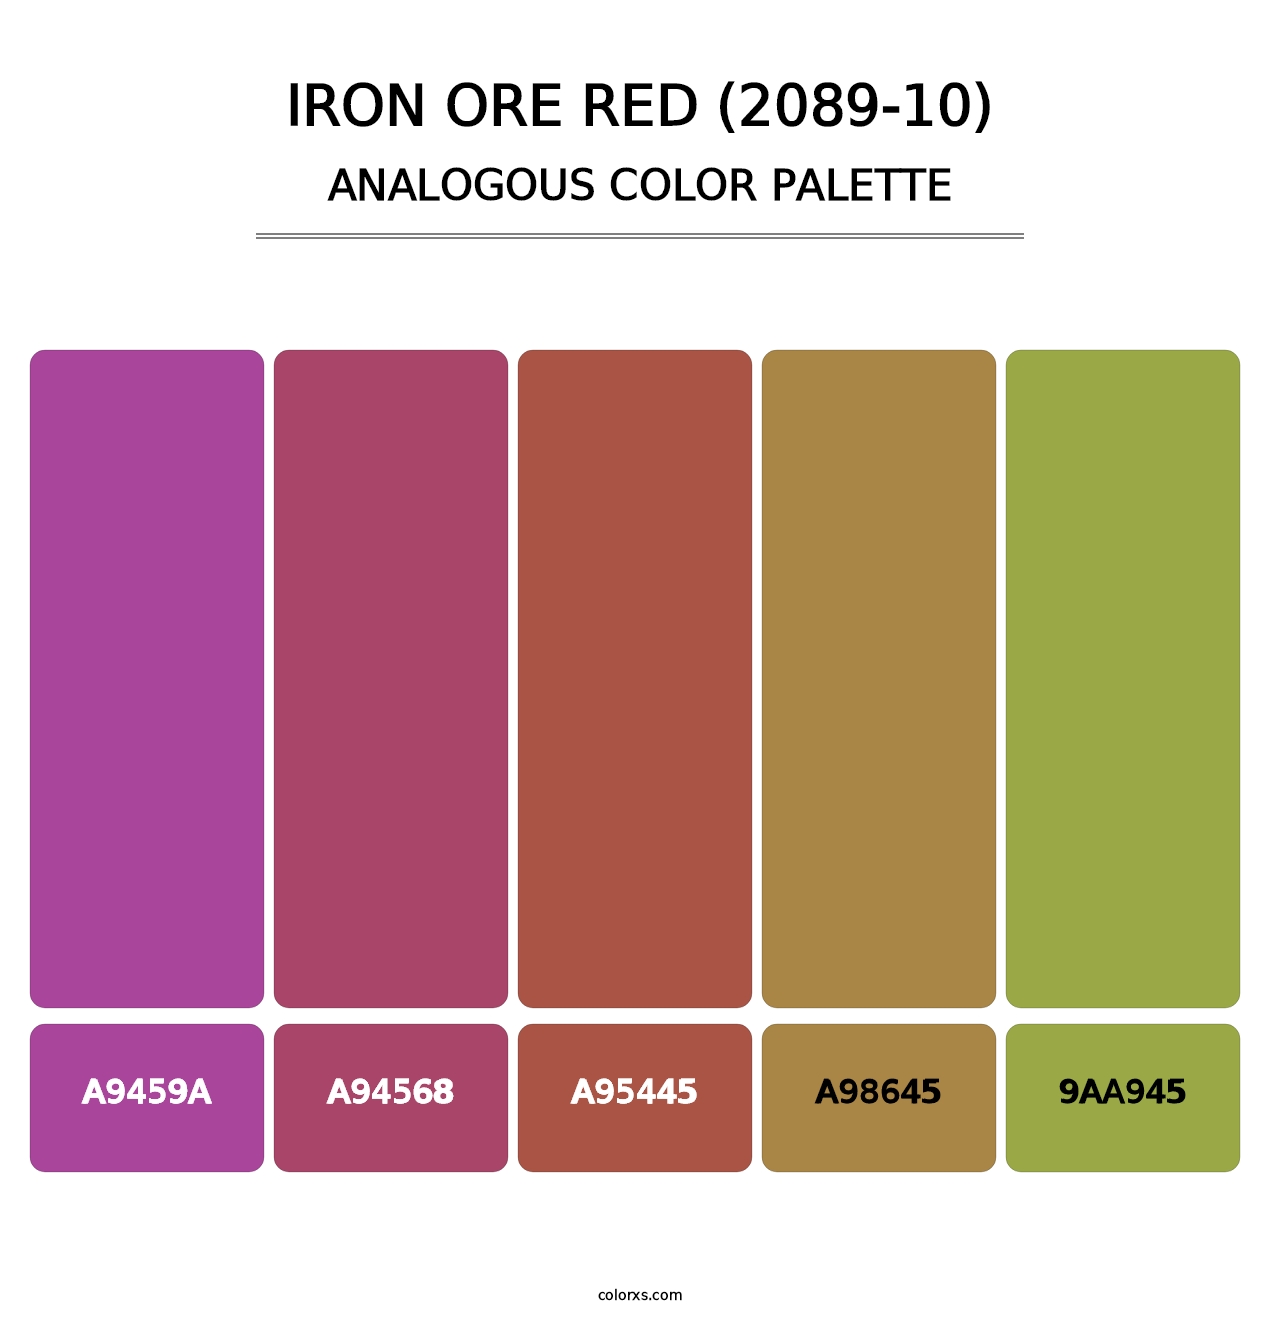 Iron Ore Red (2089-10) - Analogous Color Palette